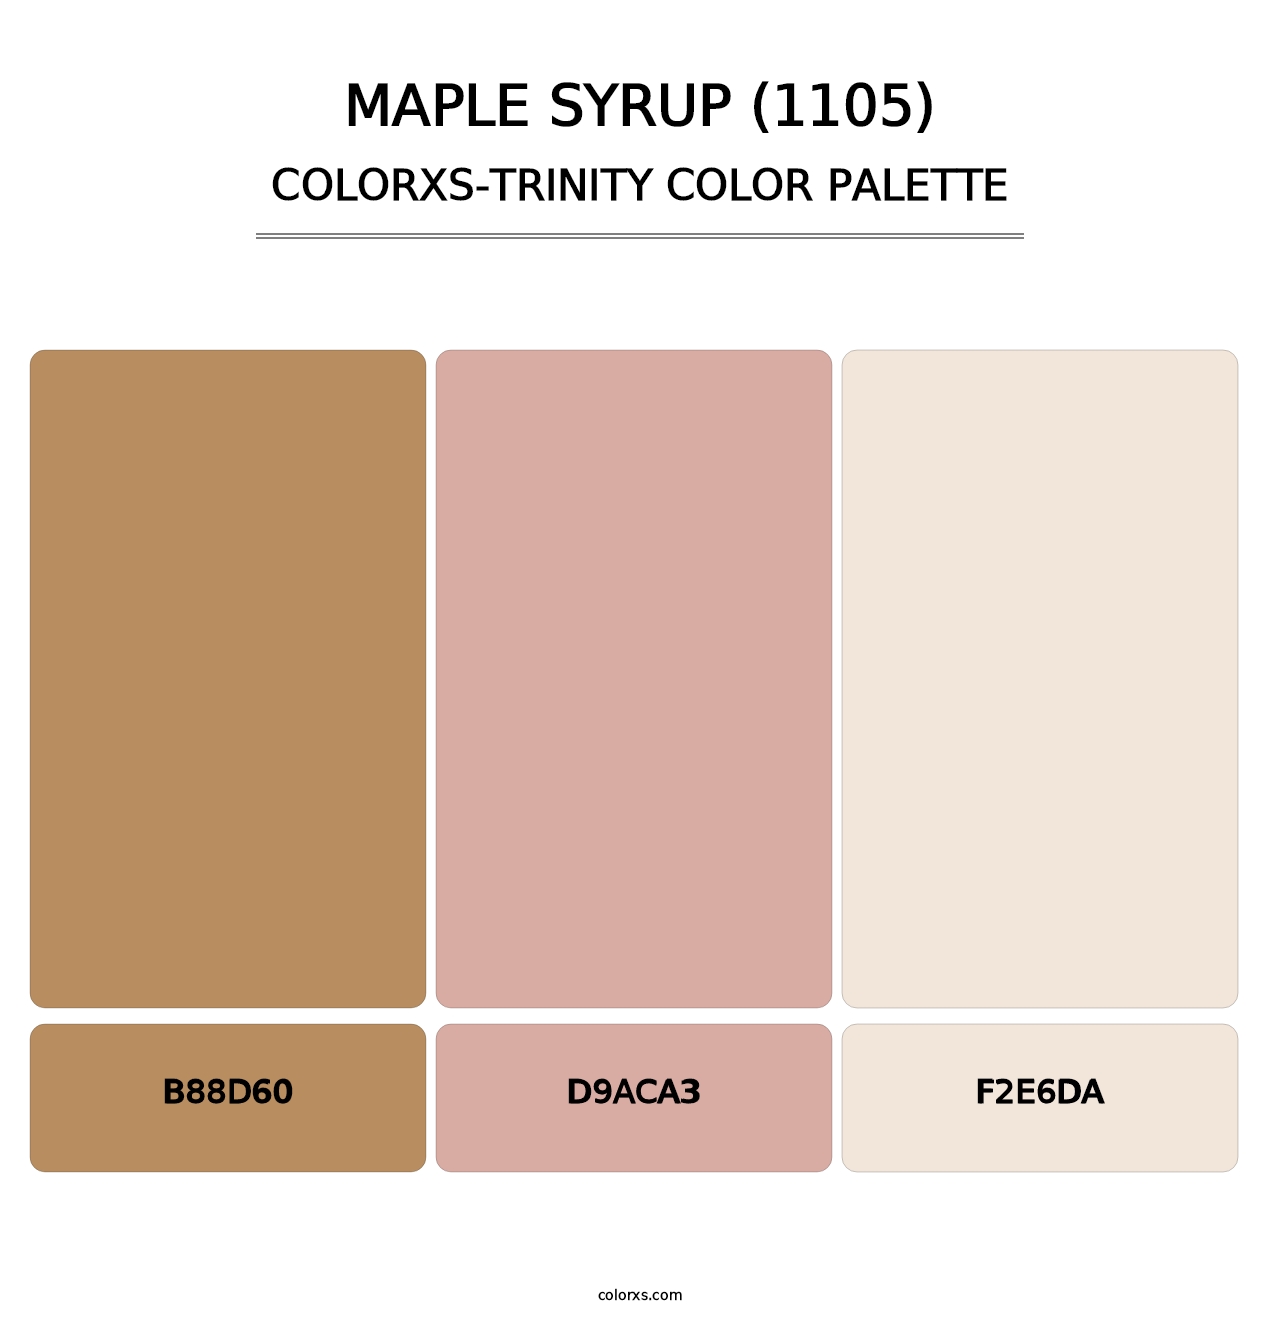 Maple Syrup (1105) - Colorxs Trinity Palette